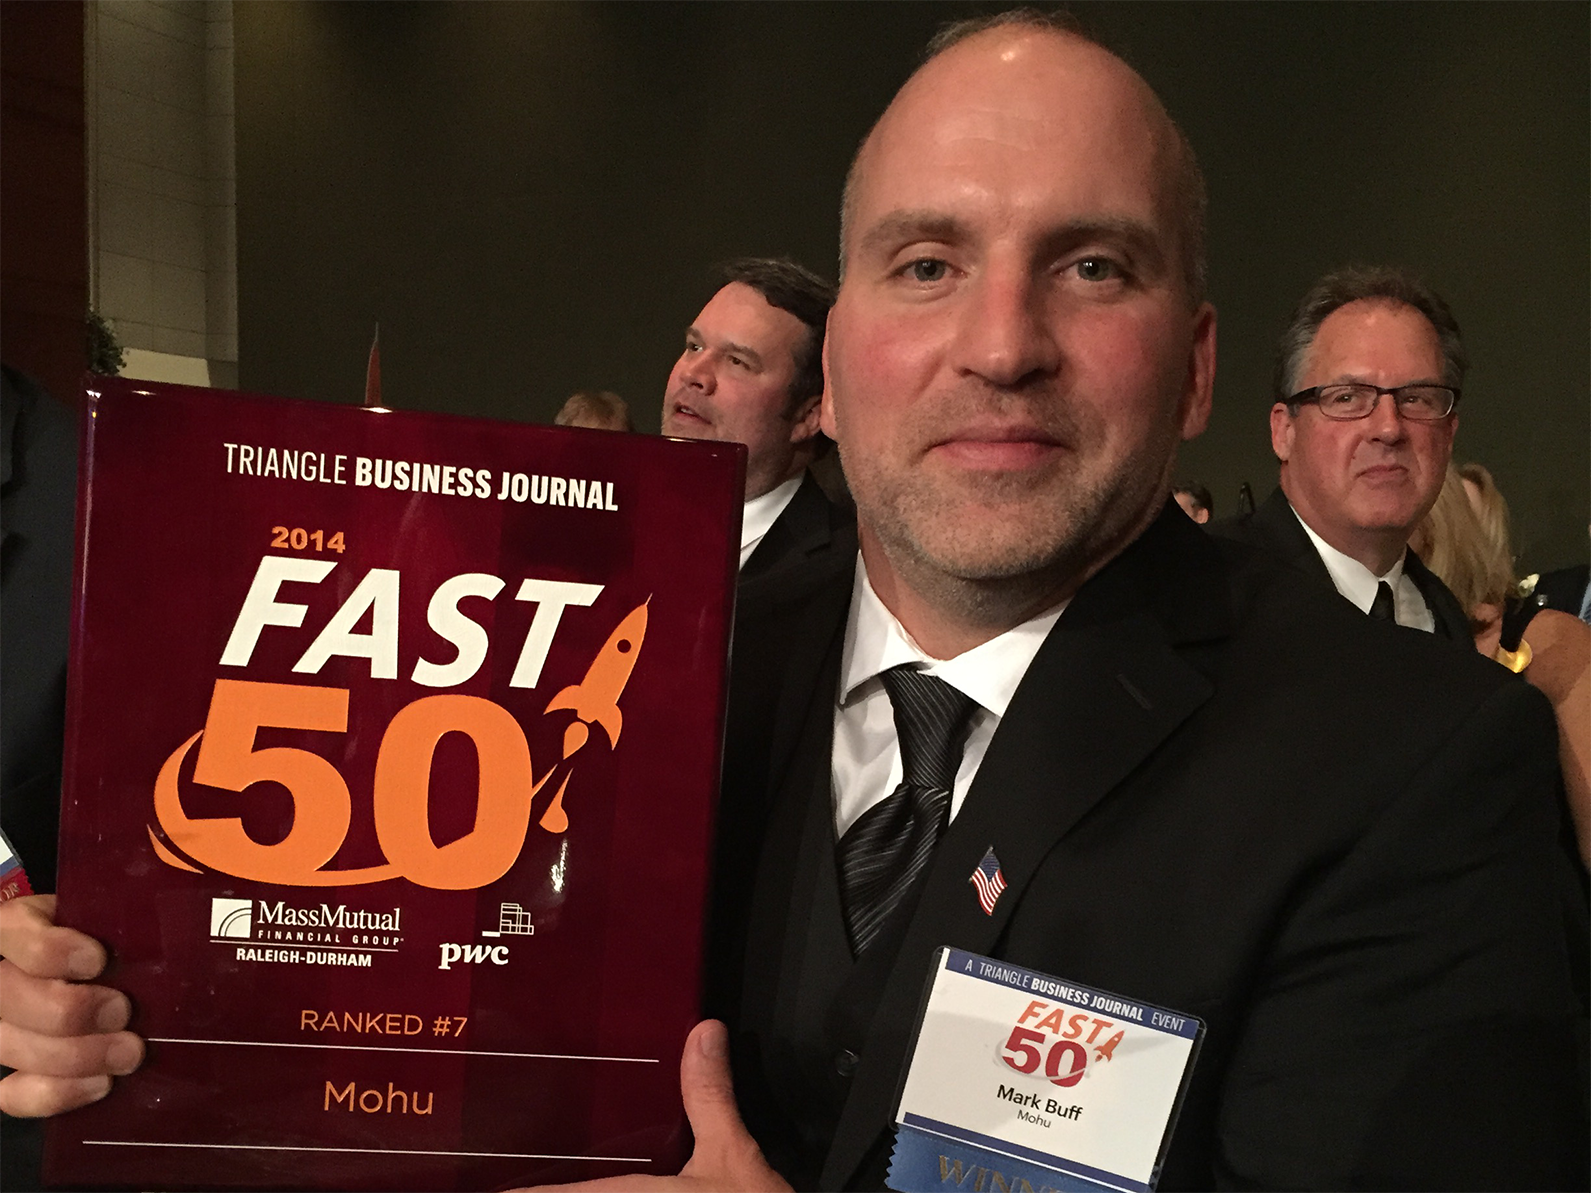 Mohu CEO Mark Buff holding his Triangle Business Journal Fast 50 Award